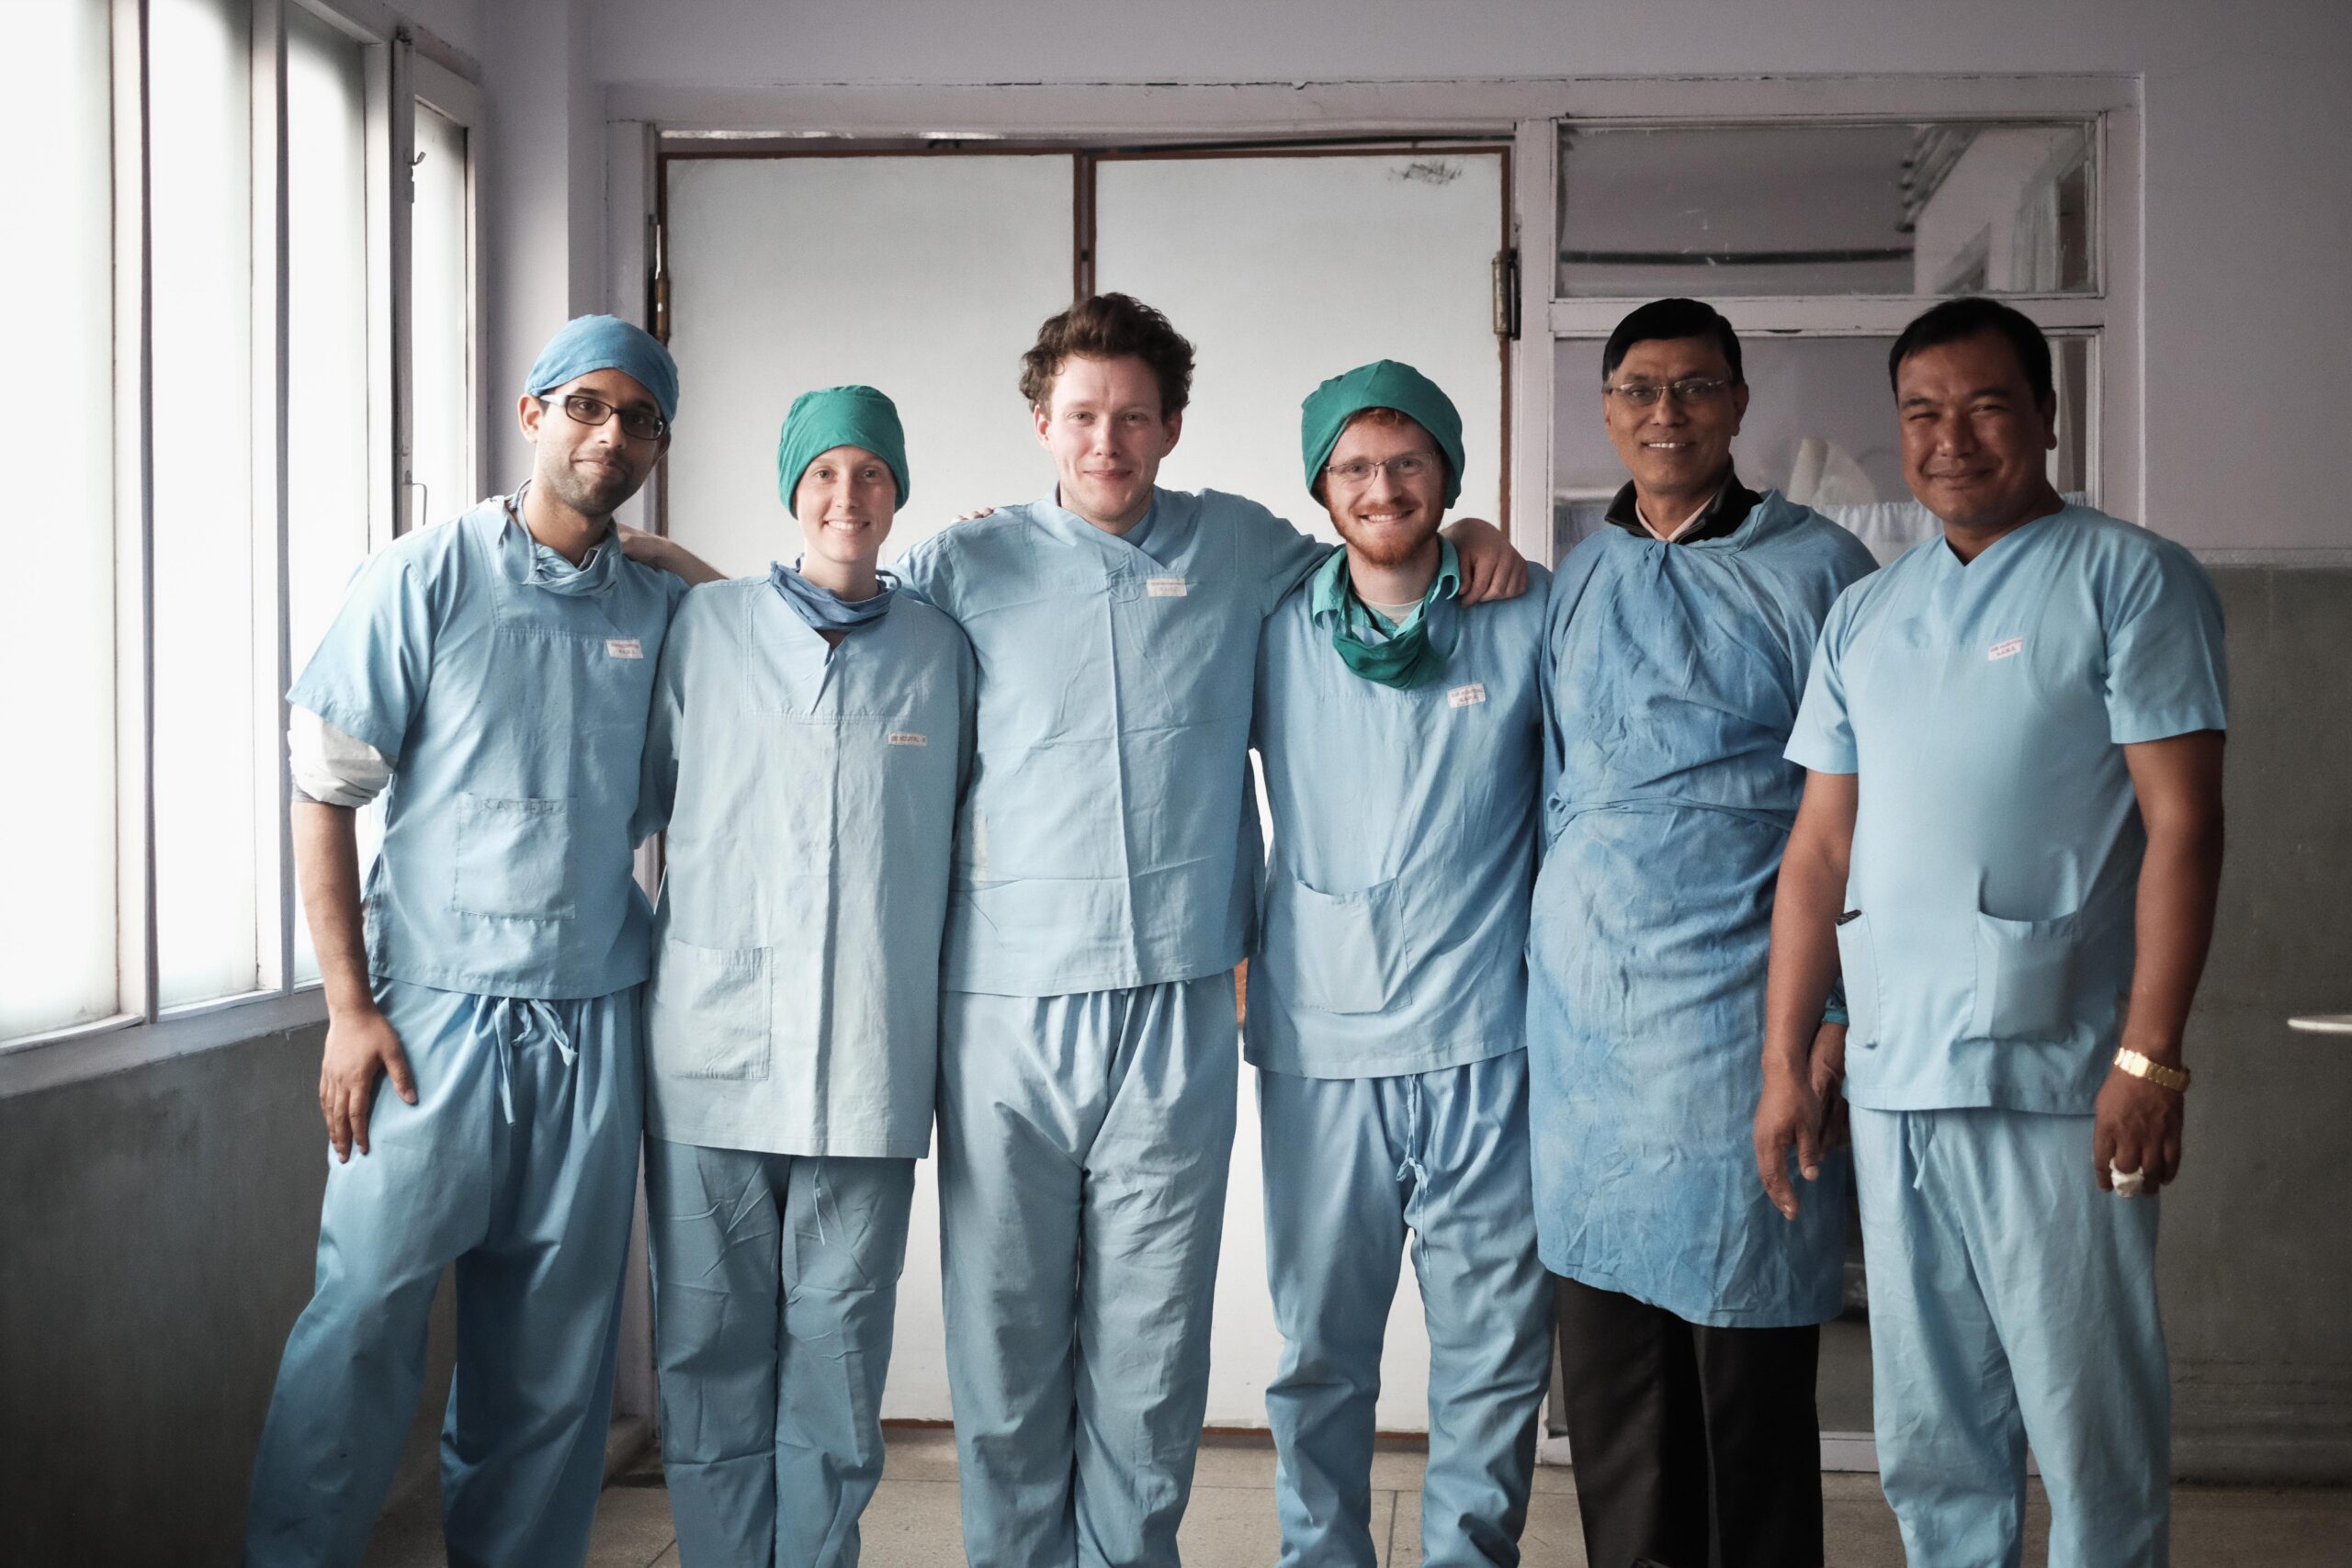 Six people pose in a row, wearing scrubs in a hospital, with arms around each other